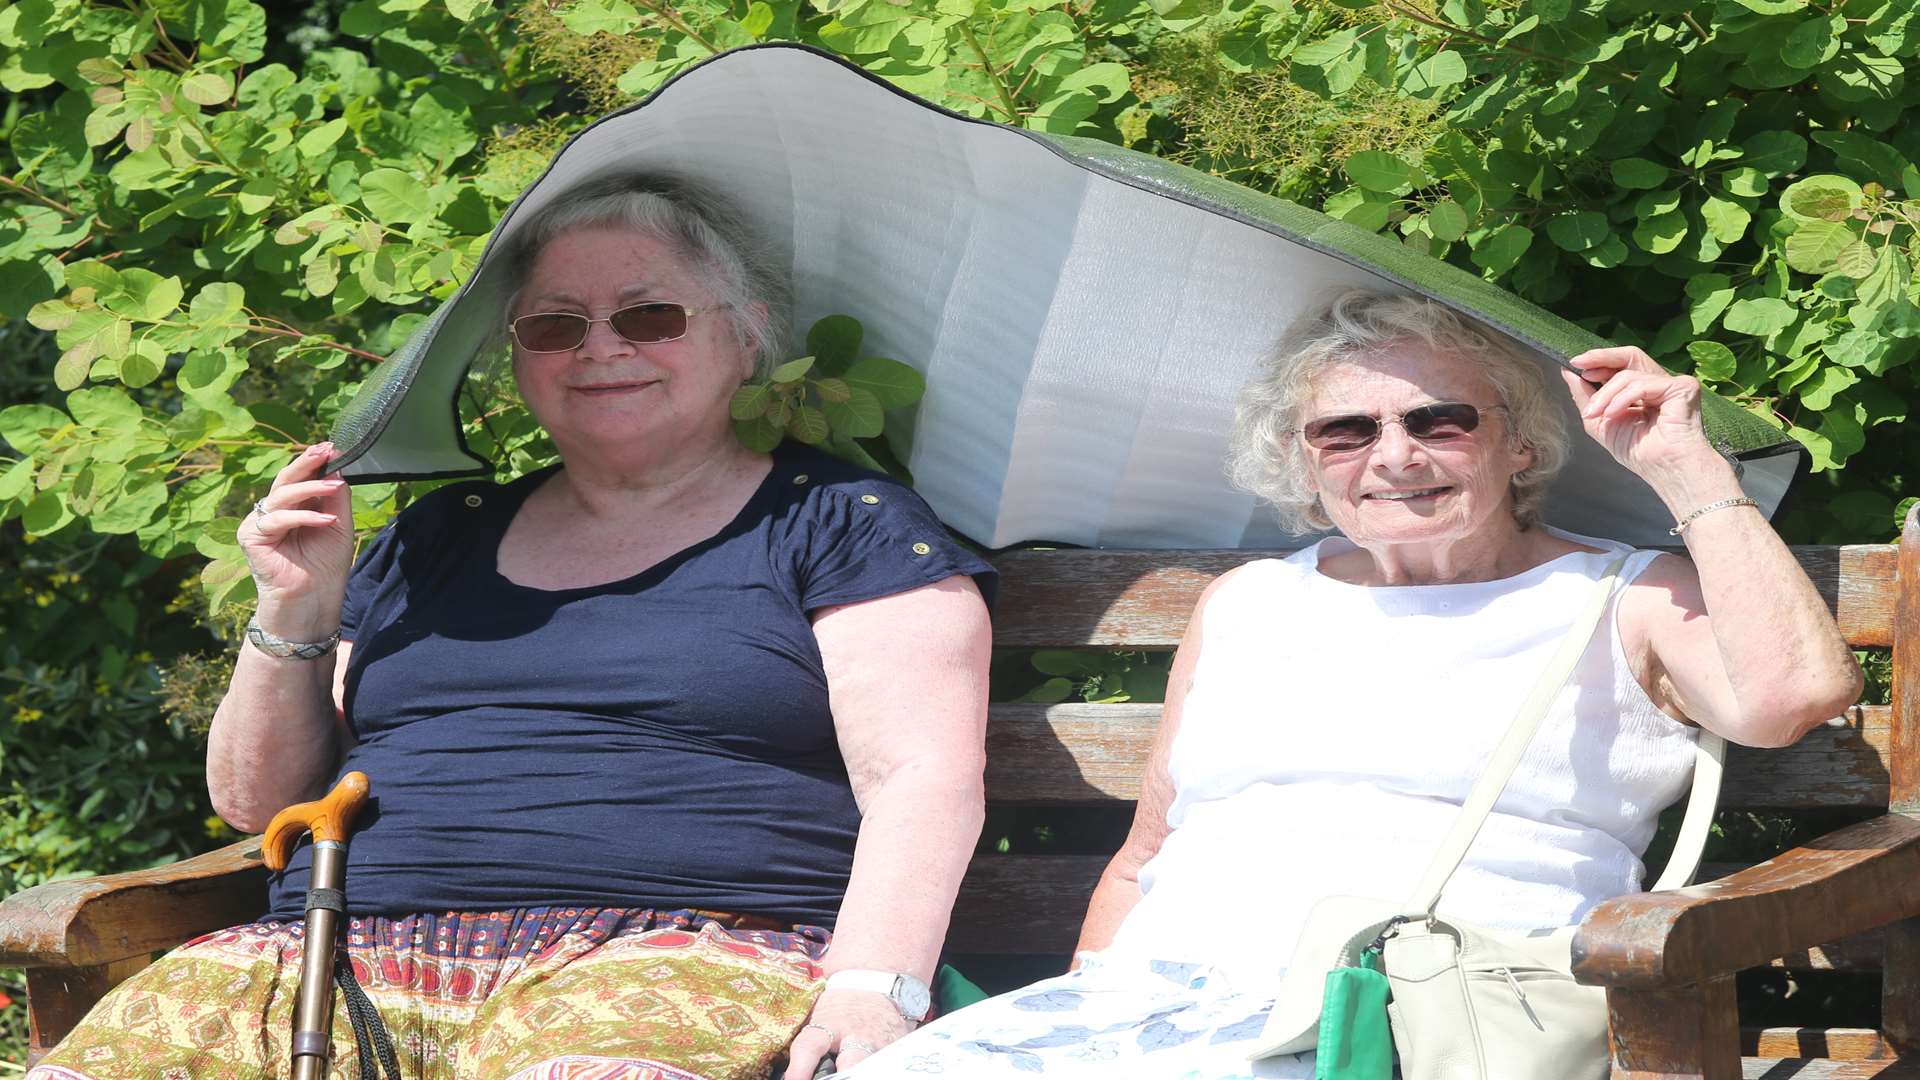 Alison Brittain, left, and her friend Pam Eldrige, shared a car windscreen cover to shelter from the sun.